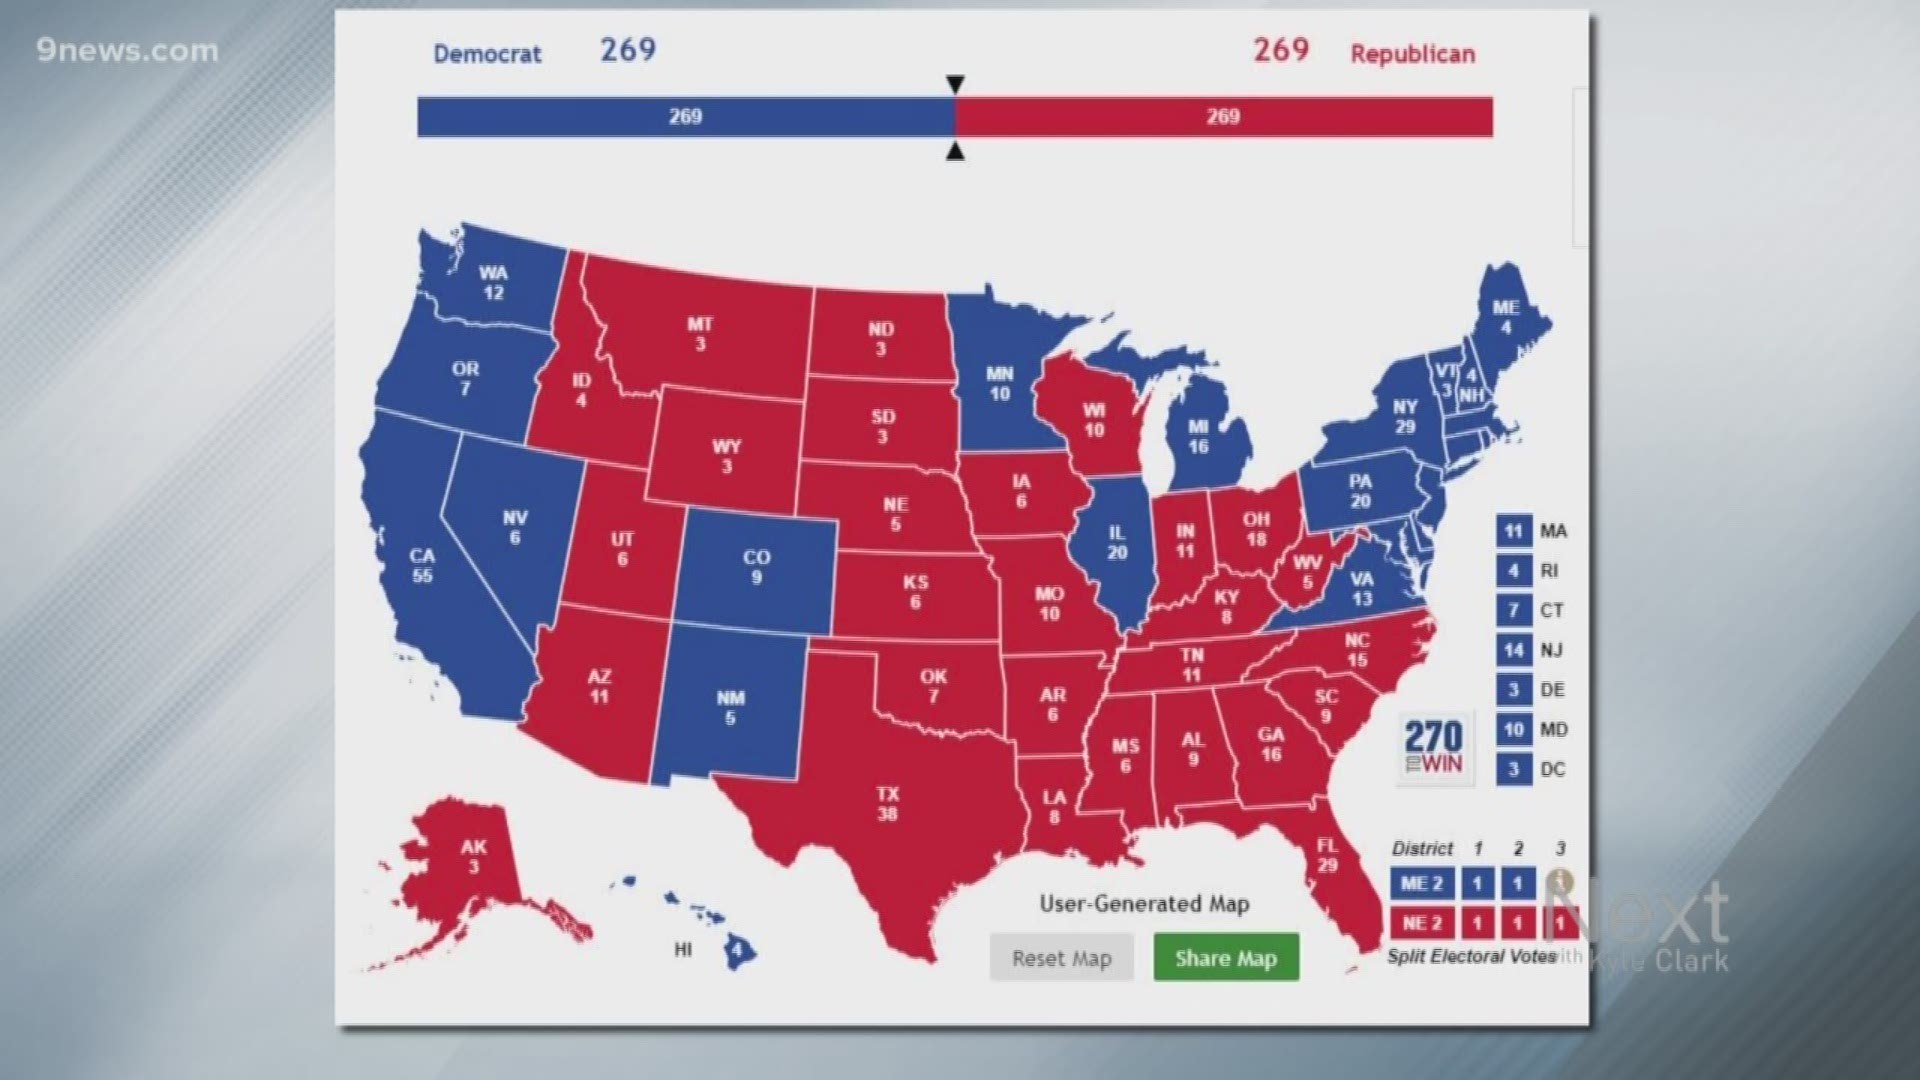 Our Next question comes from a viewer named E.J. He asks, "What happens when the electoral college ends in a tie?"